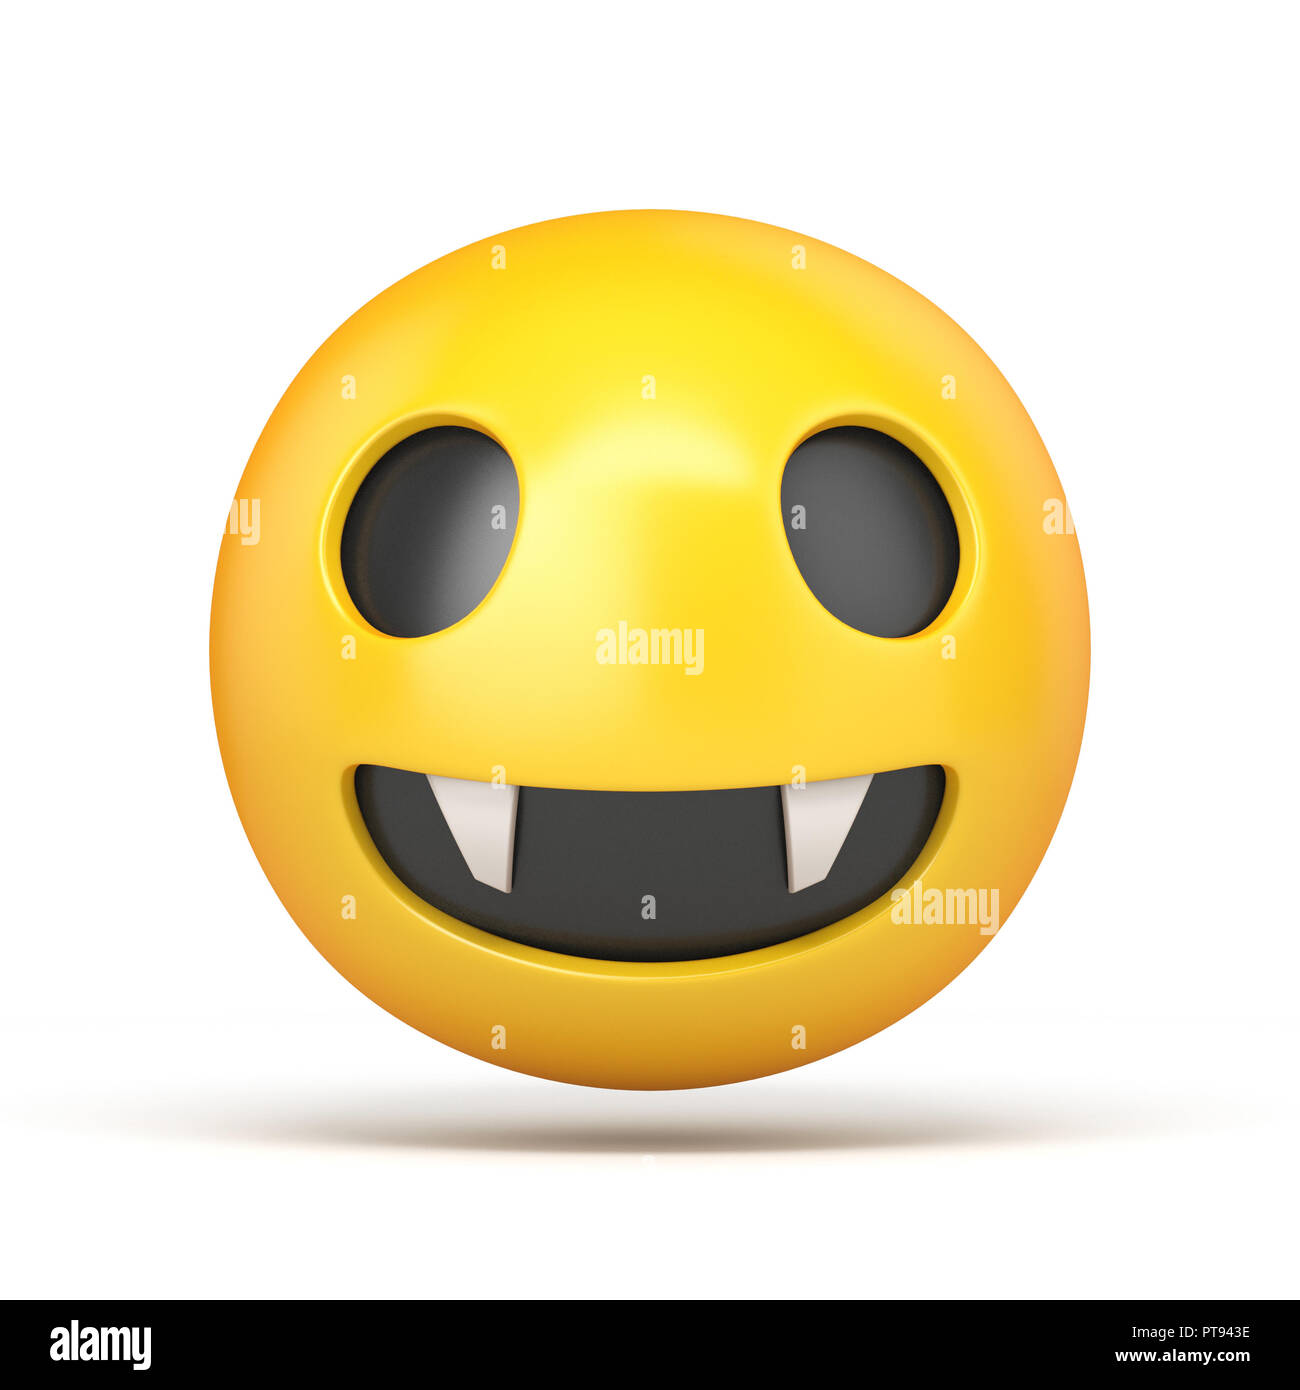 smiley faces with teeth showing